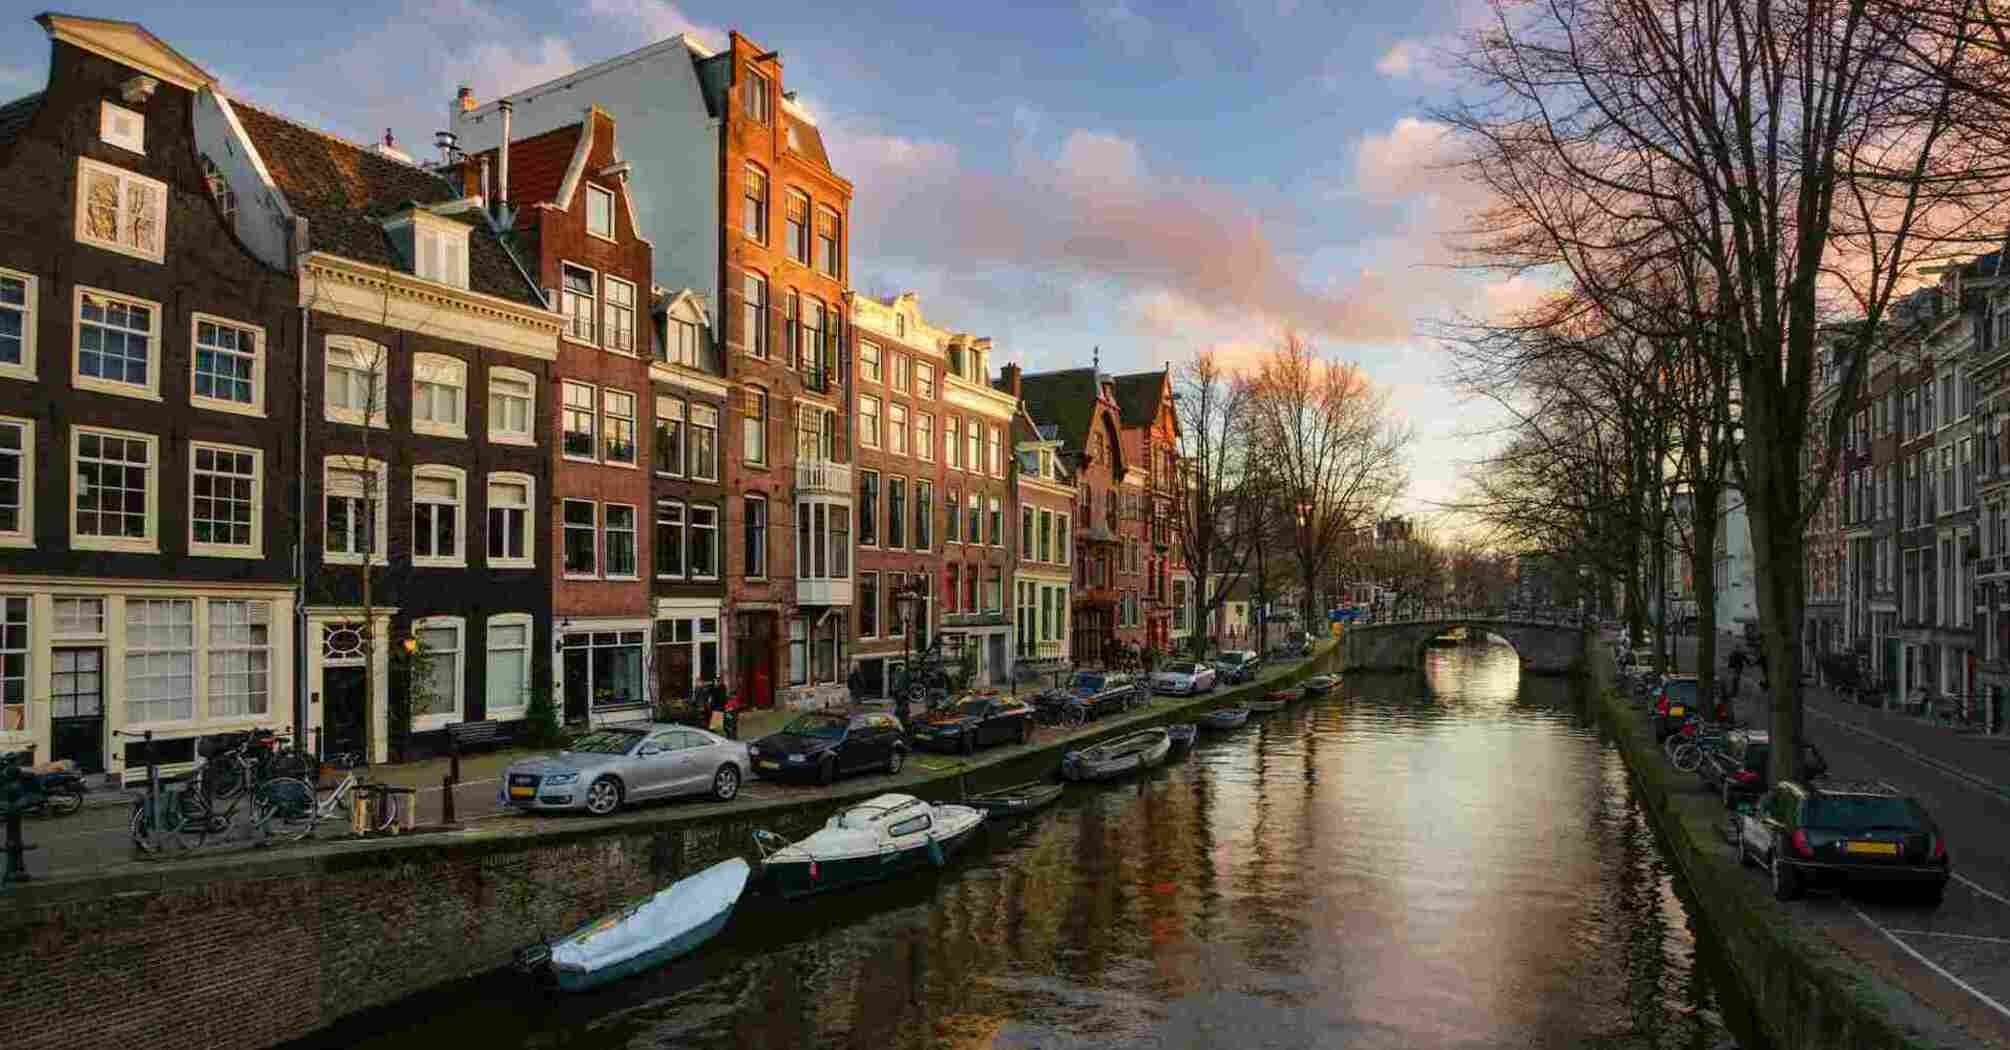 The Netherlands has canceled the residence permit program for investors